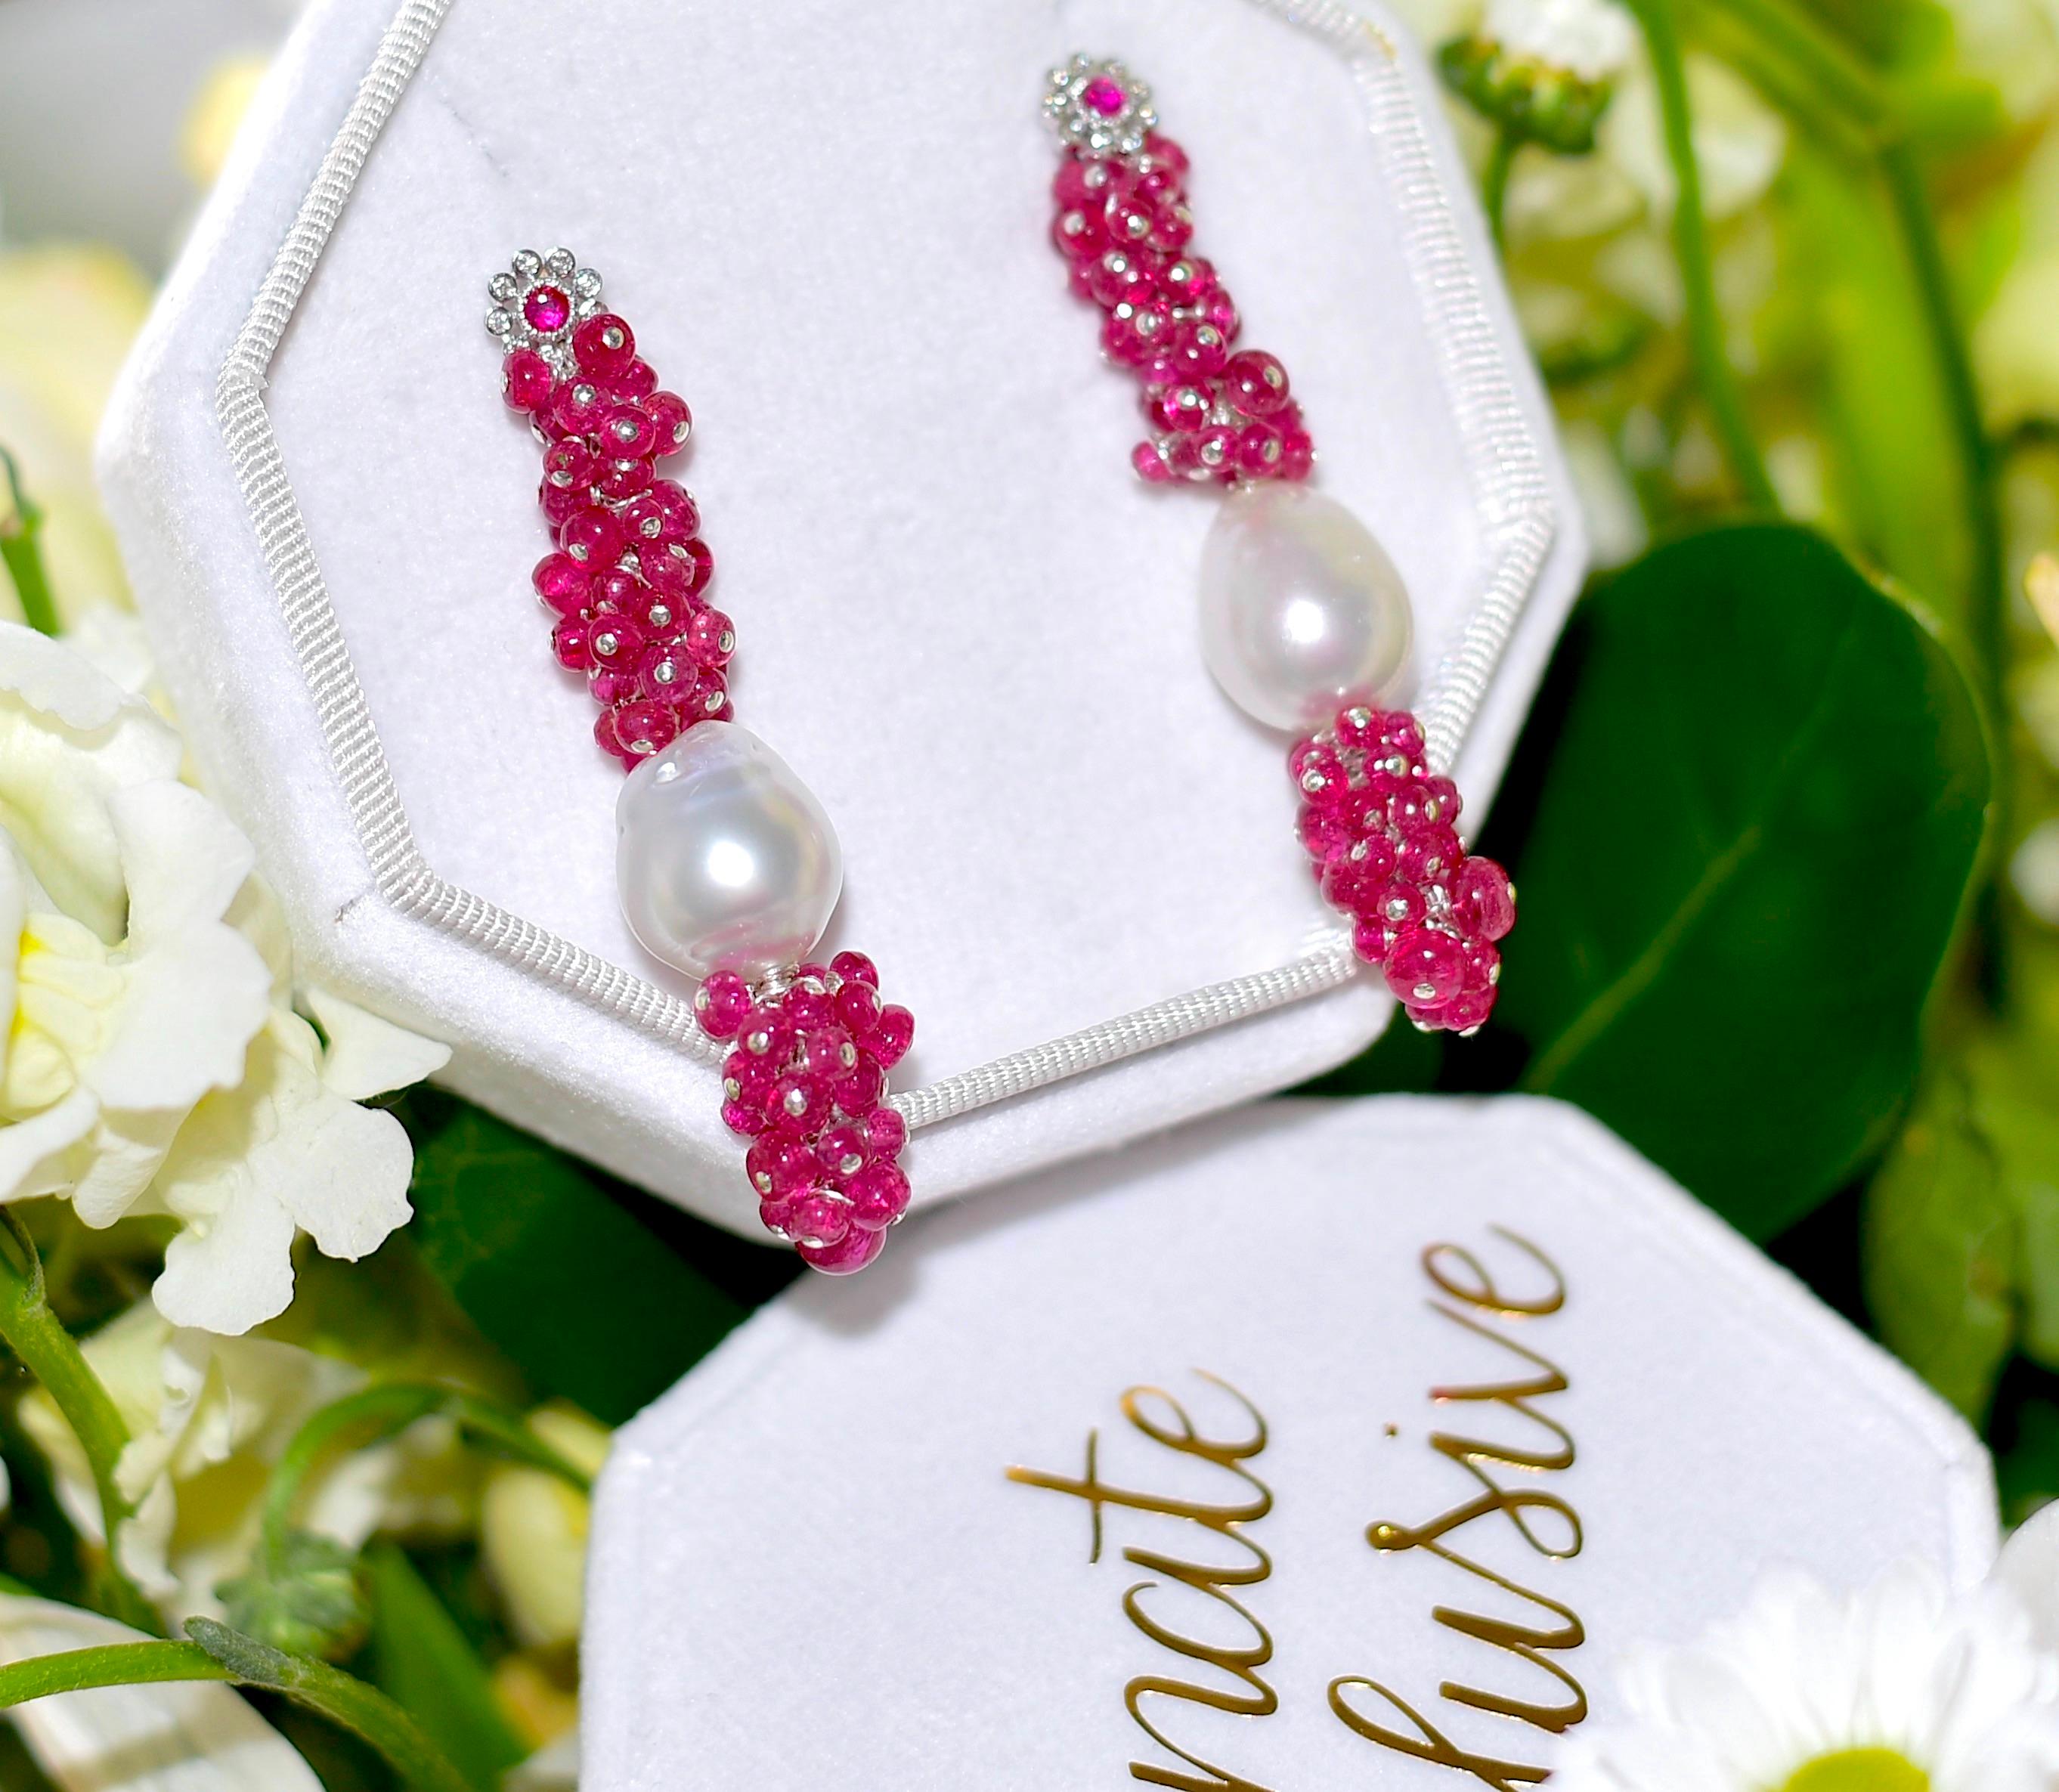 Bohemian luxury! 
If you like originality, long earrings, and a wonderful combination of colors, and pearls, then these earrings are for you! 
The wonderful stud earring post is 14K Solid White Gold with Natural Ruby as decoration. Elegant, unique,